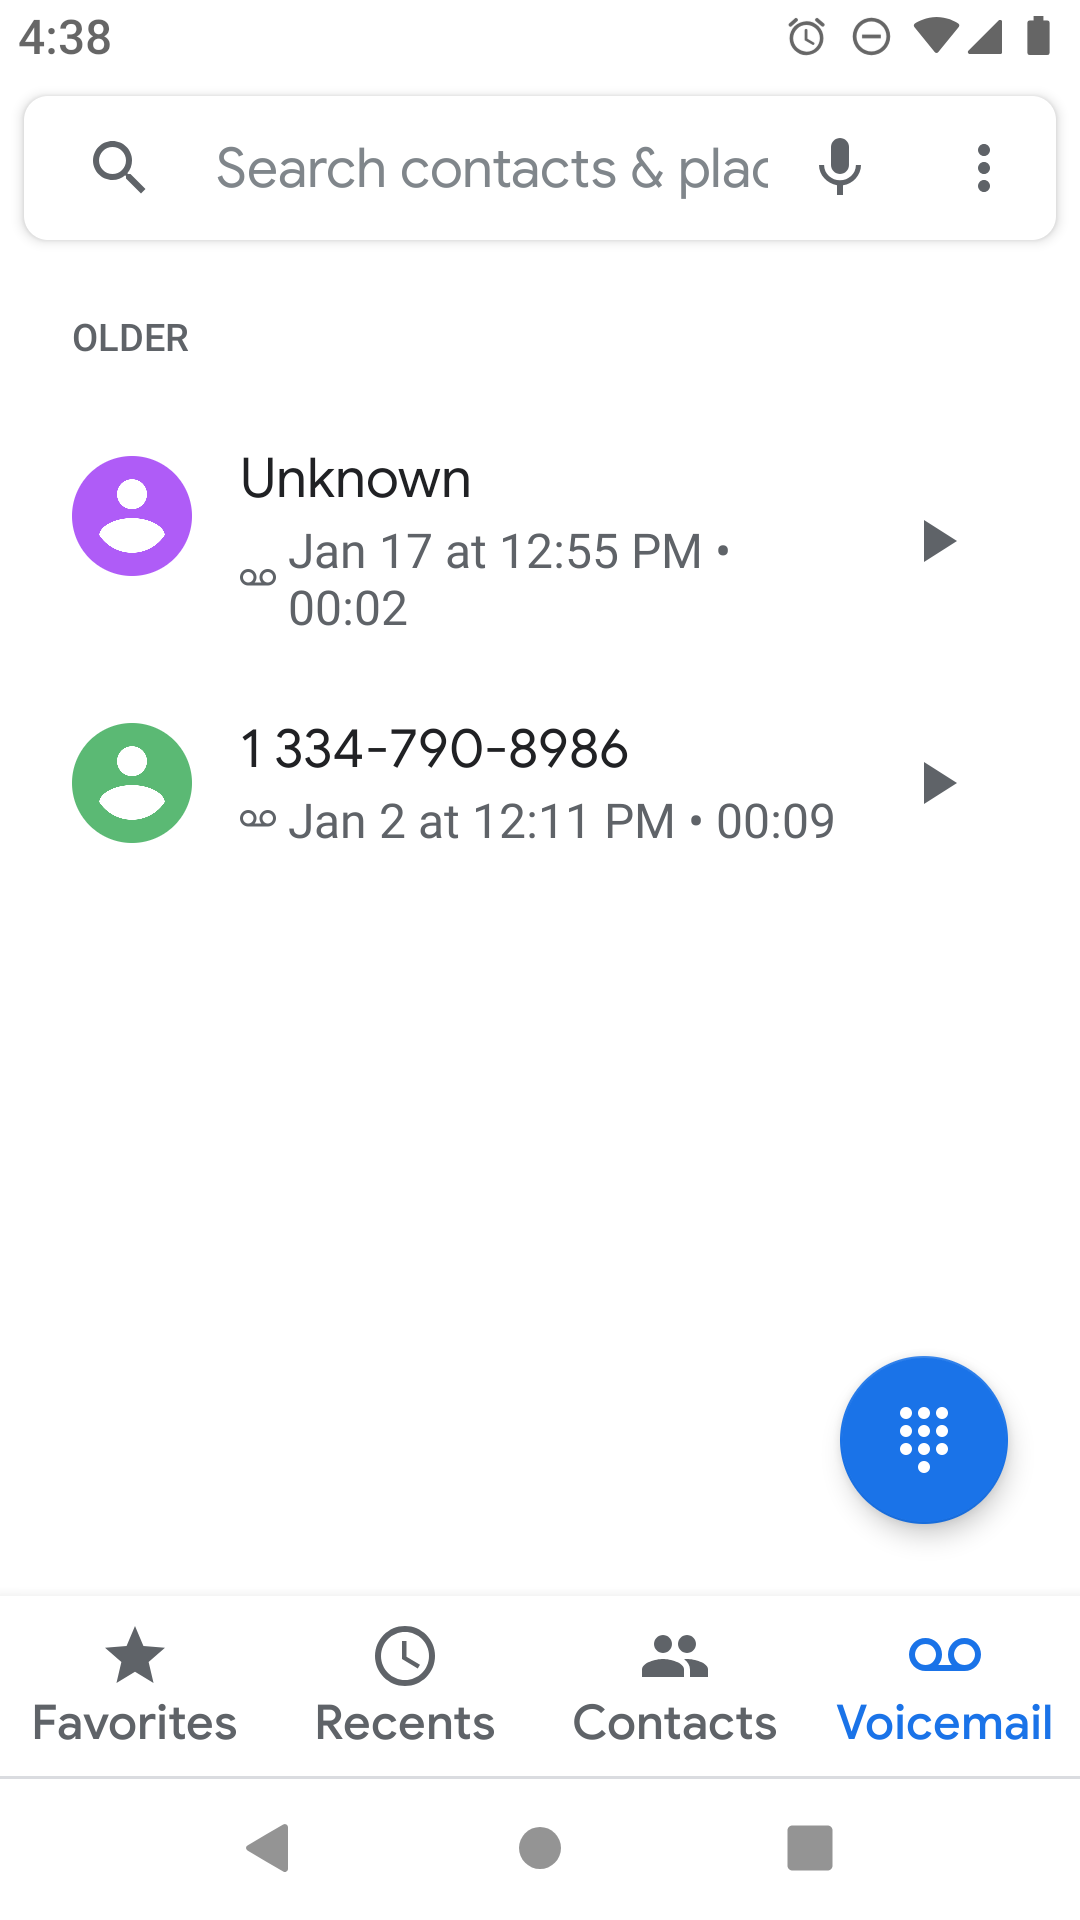 Is there a fix for visual voicemail (VVM) for Moto x4 with